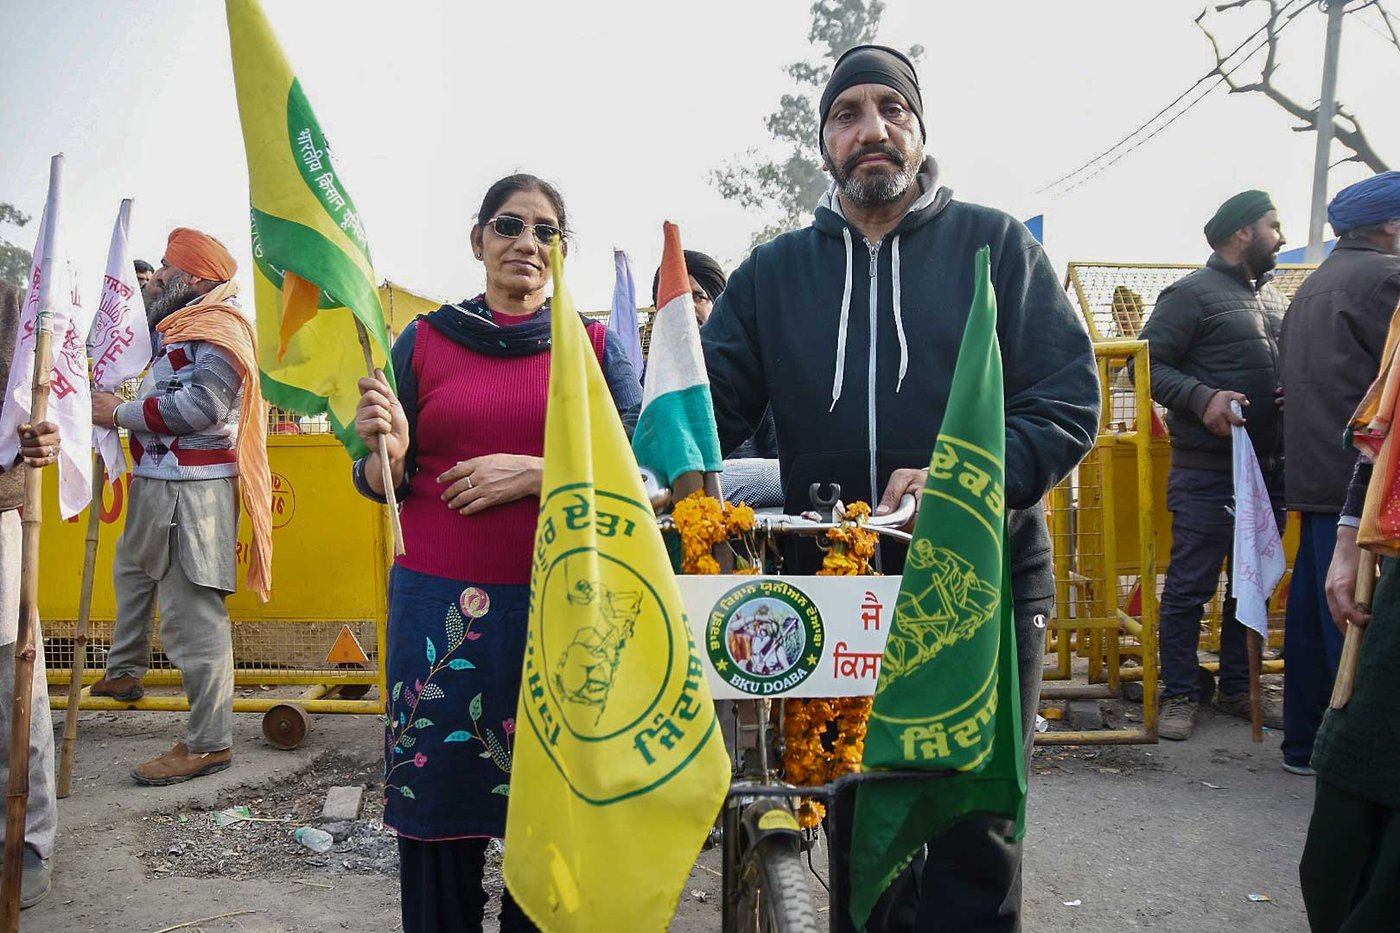 Ramesh Kumar cycled from Punjab’s Hoshiarpur to the farmers’ protest site in Singhu to participate in the Republic Day farmers’ parade on January 26